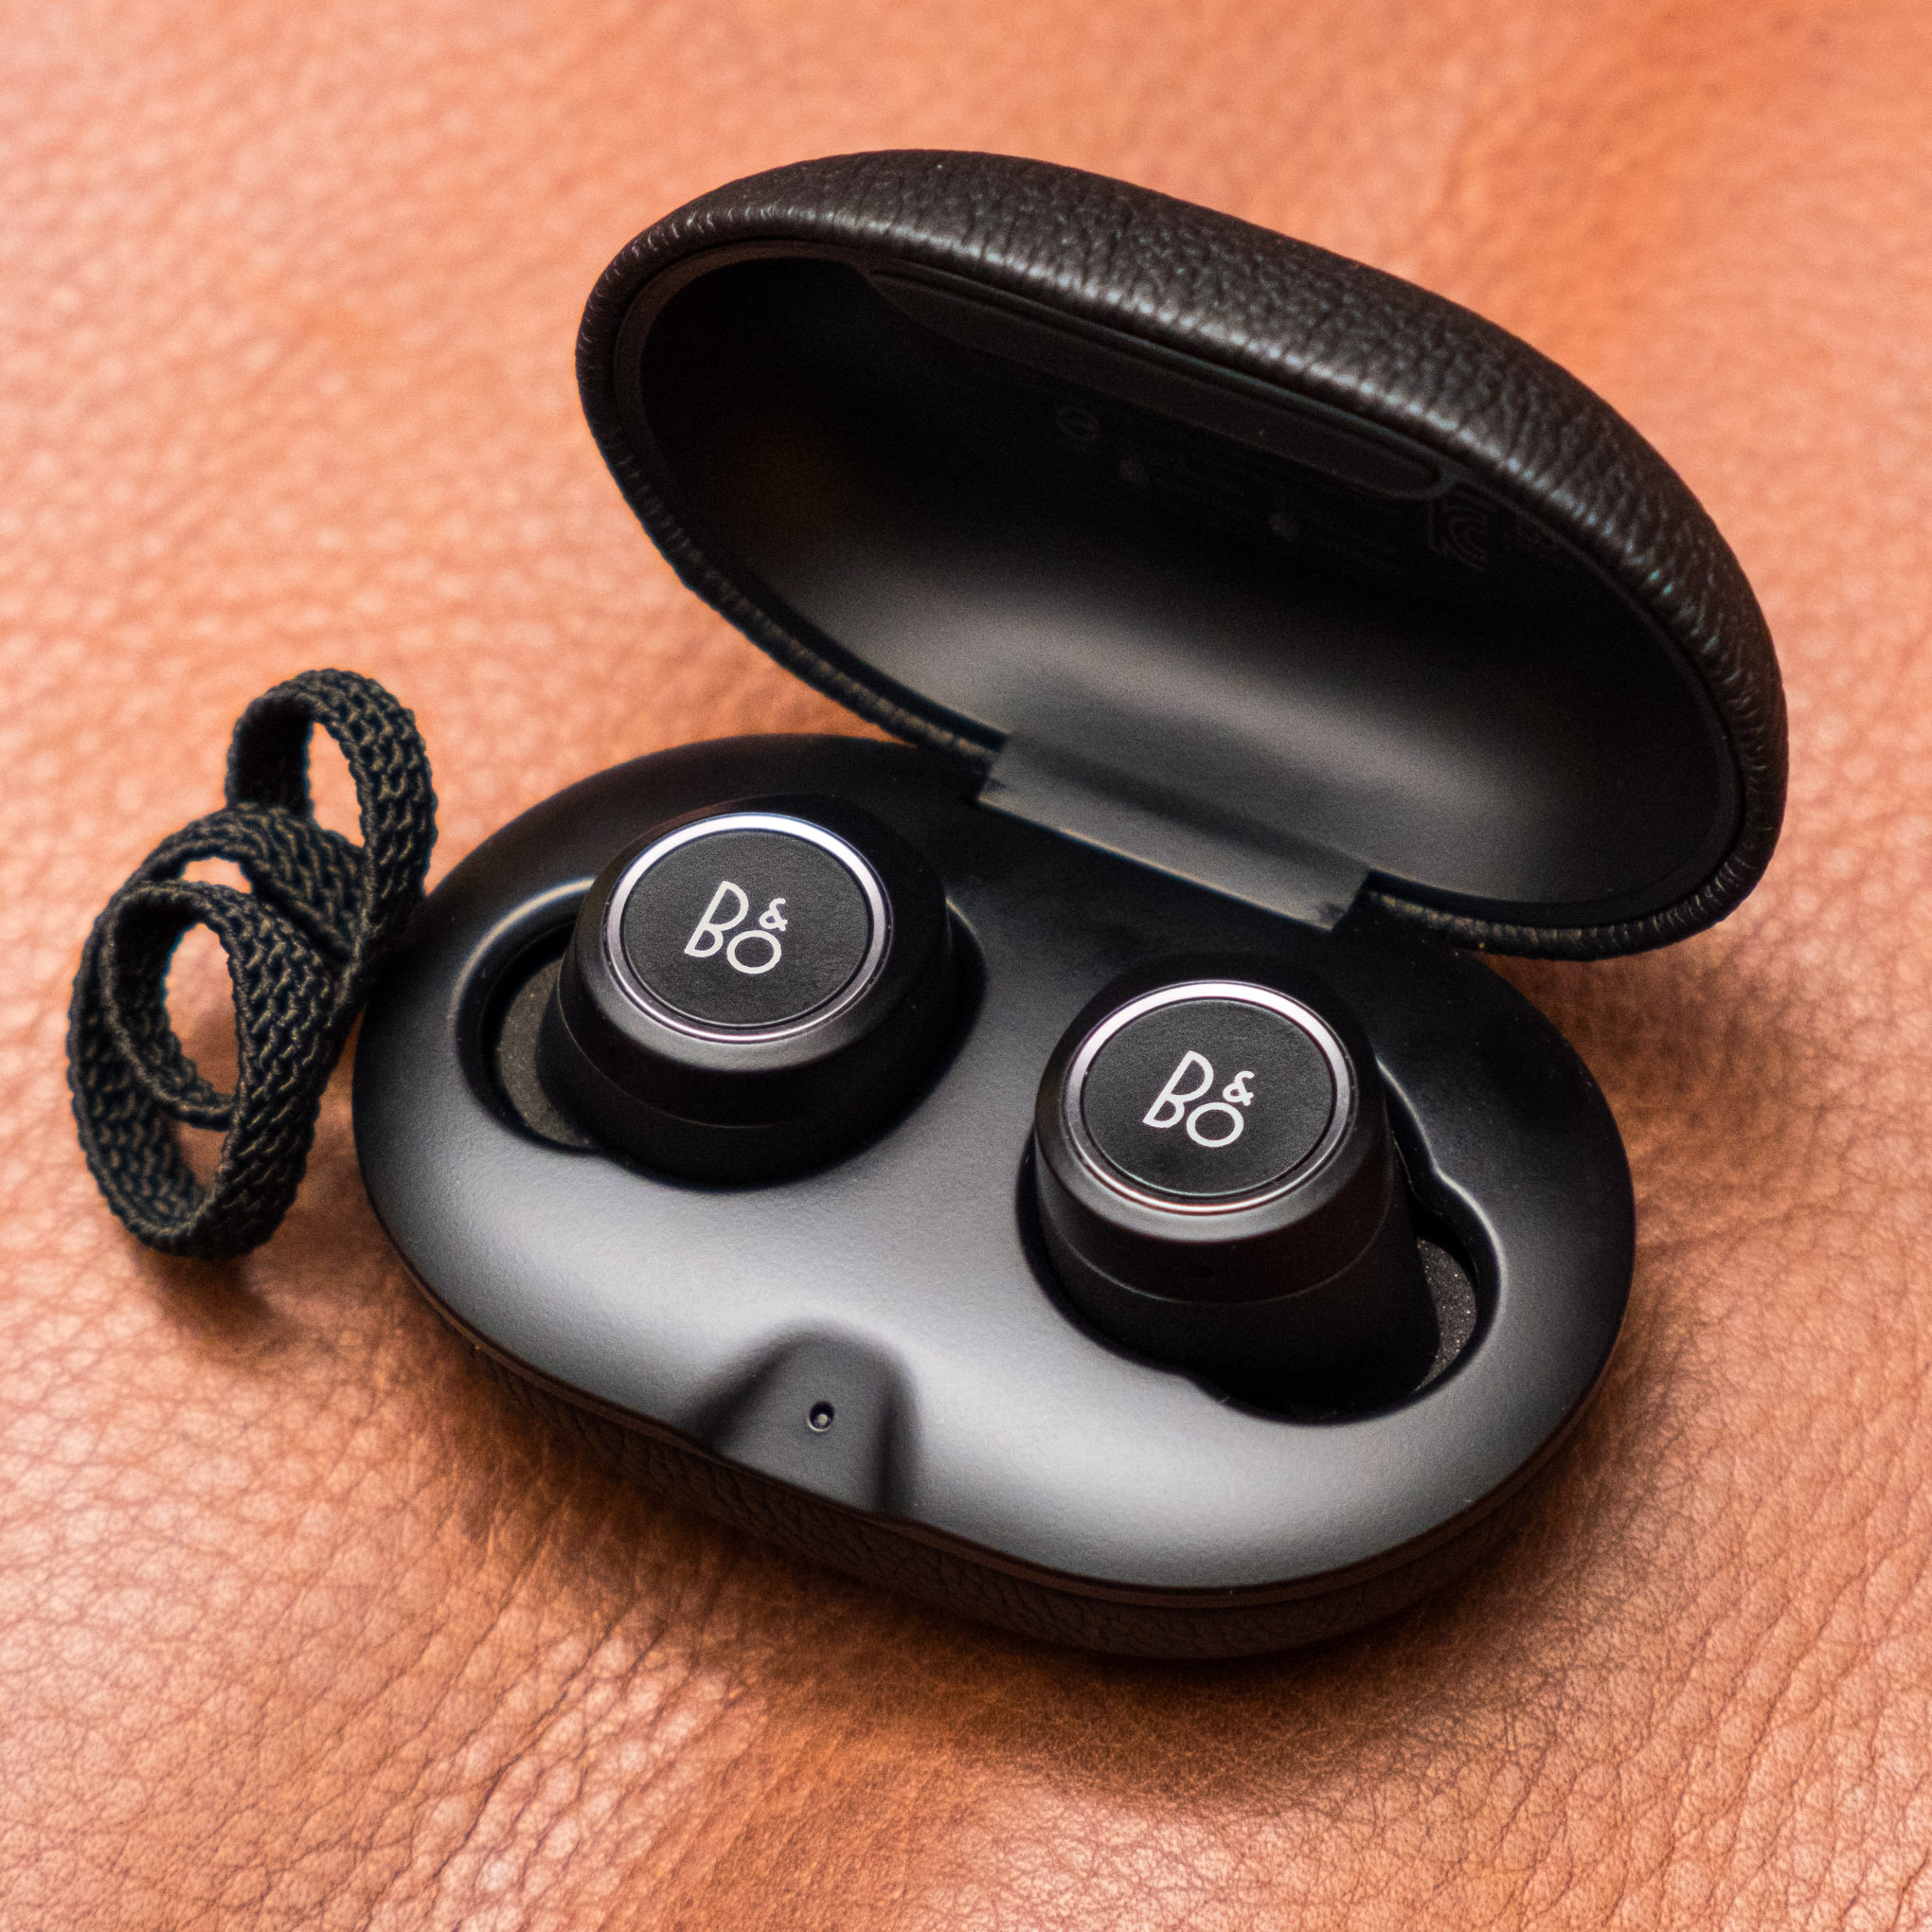 B&O Beoplay wireless earbuds review - Verge